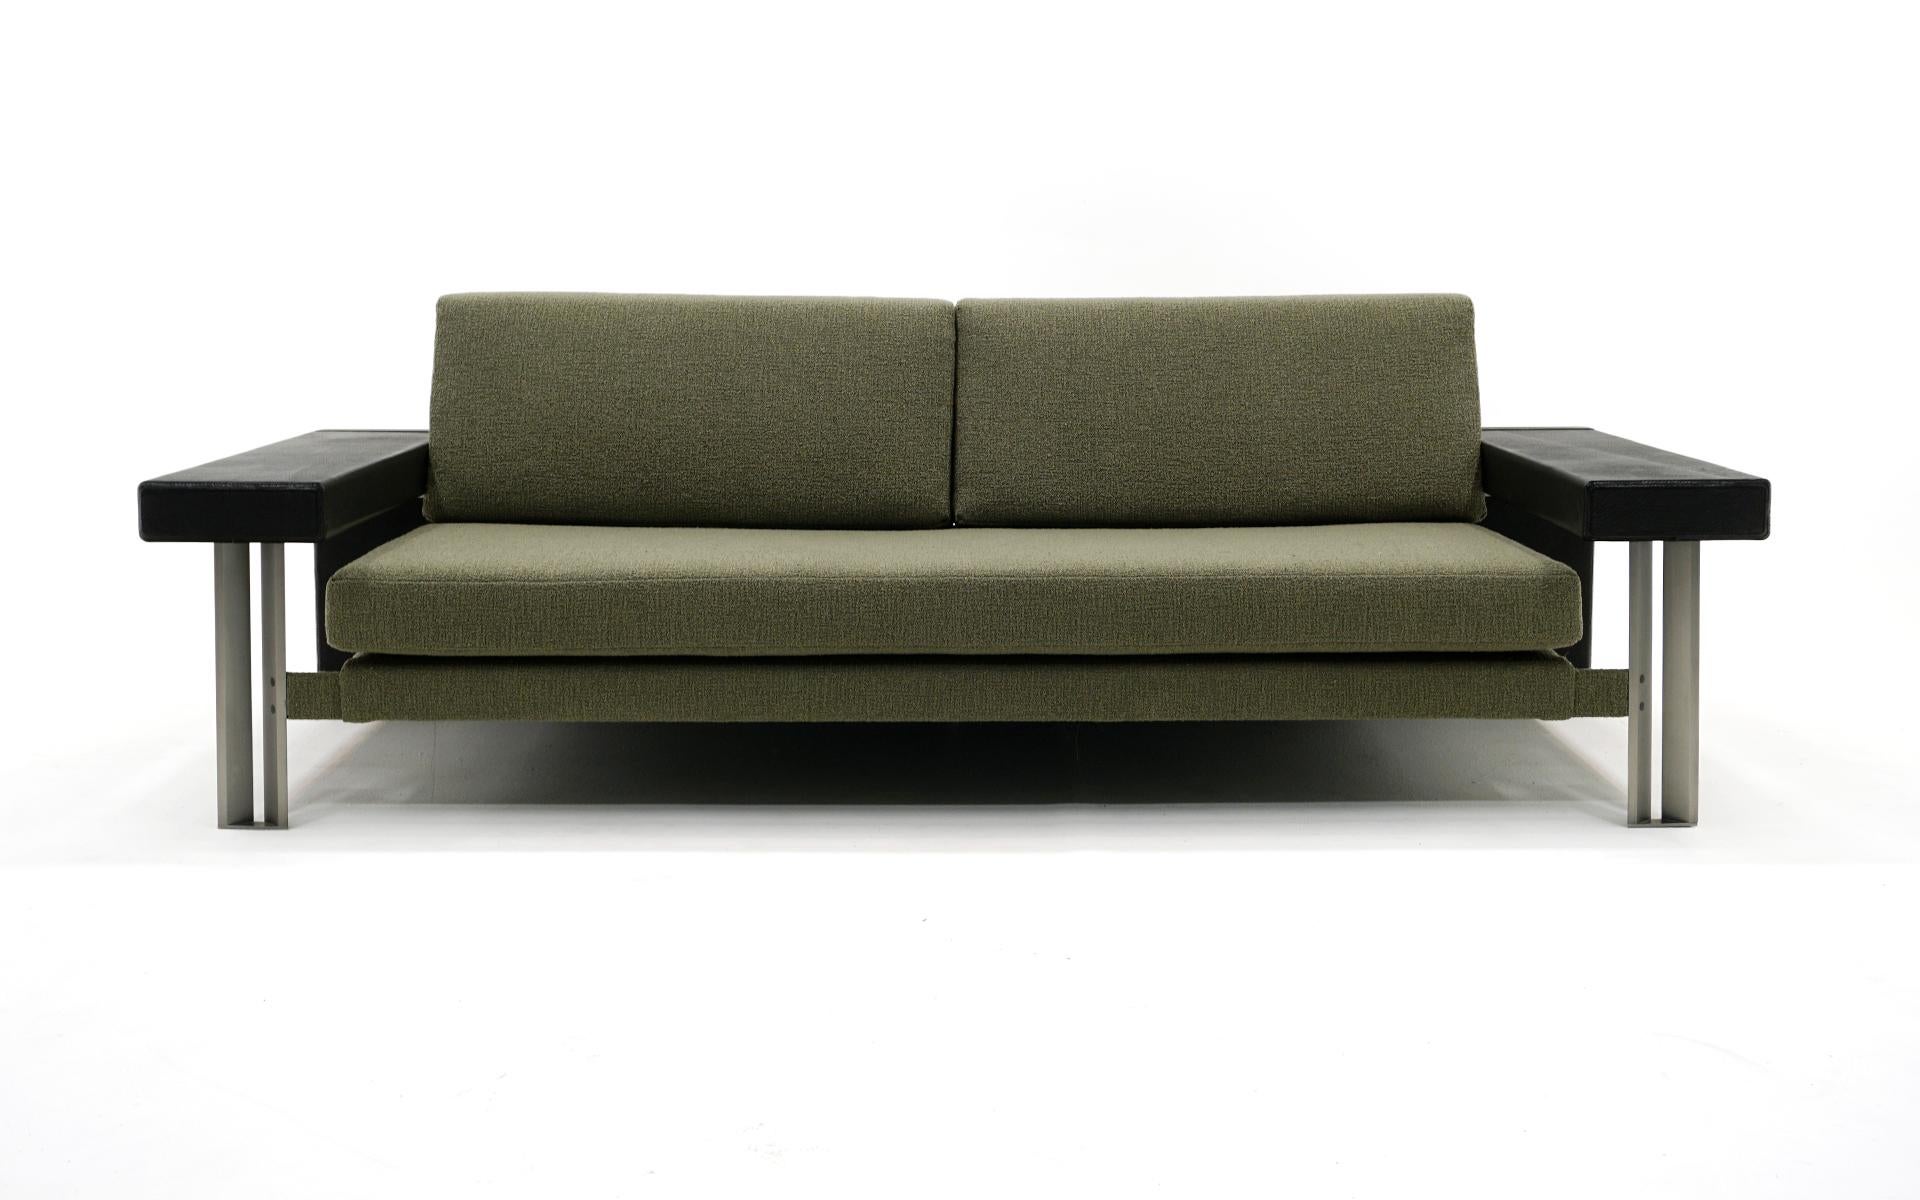 Two sofas designed by Giovanni Offredi for Saporiti, Italy, 1970s.  Newer muted green upholstery, Leather covered arms and back, lacquered wood backrest supported on a stainless steel frame.  Both sofas are in very good condition and ready to use.